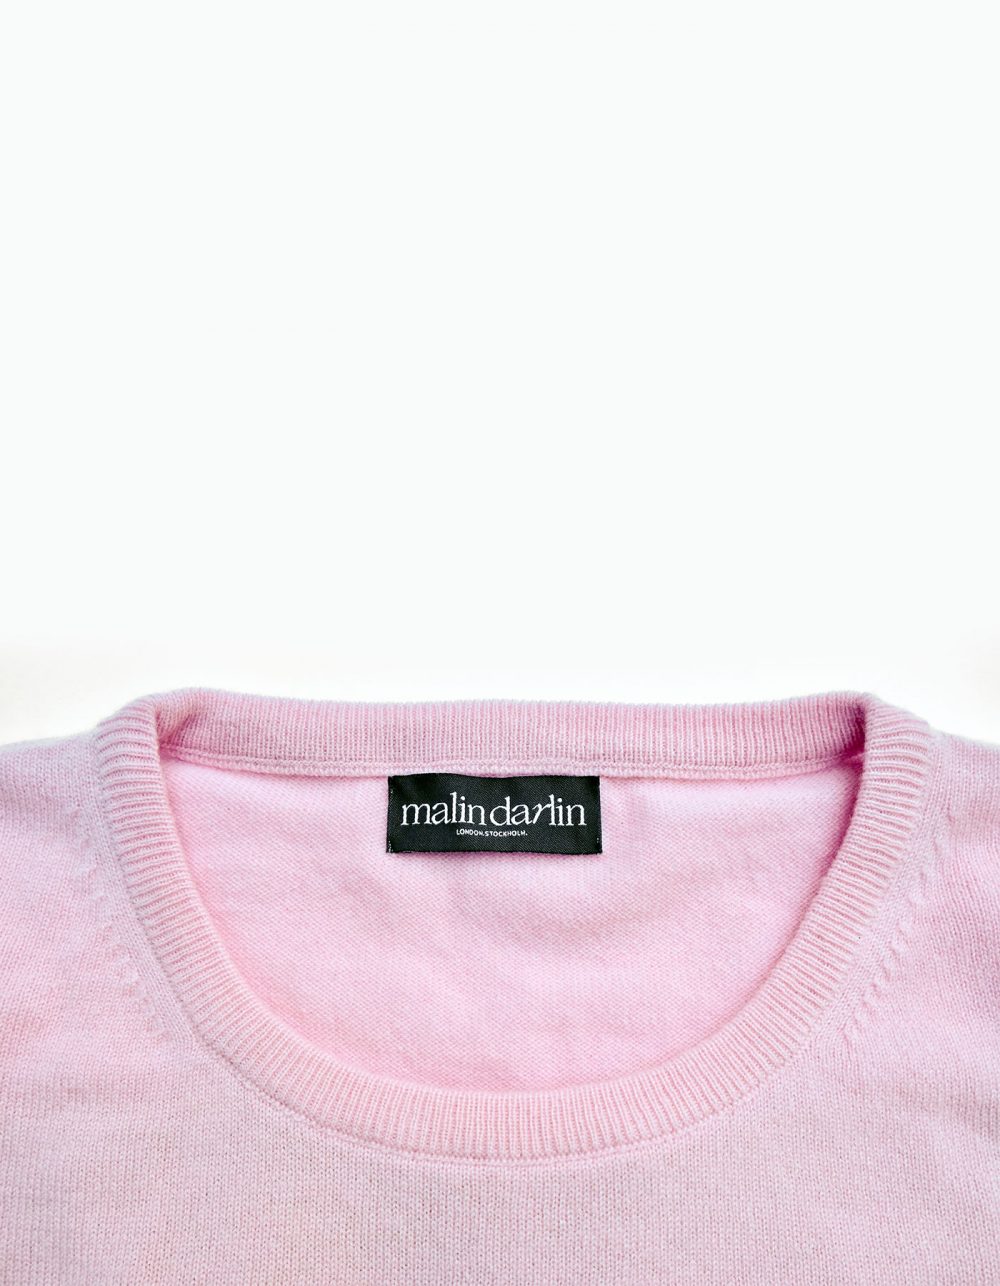 Collar and label detail of the Little Darlin pink kids cashmere jumper.